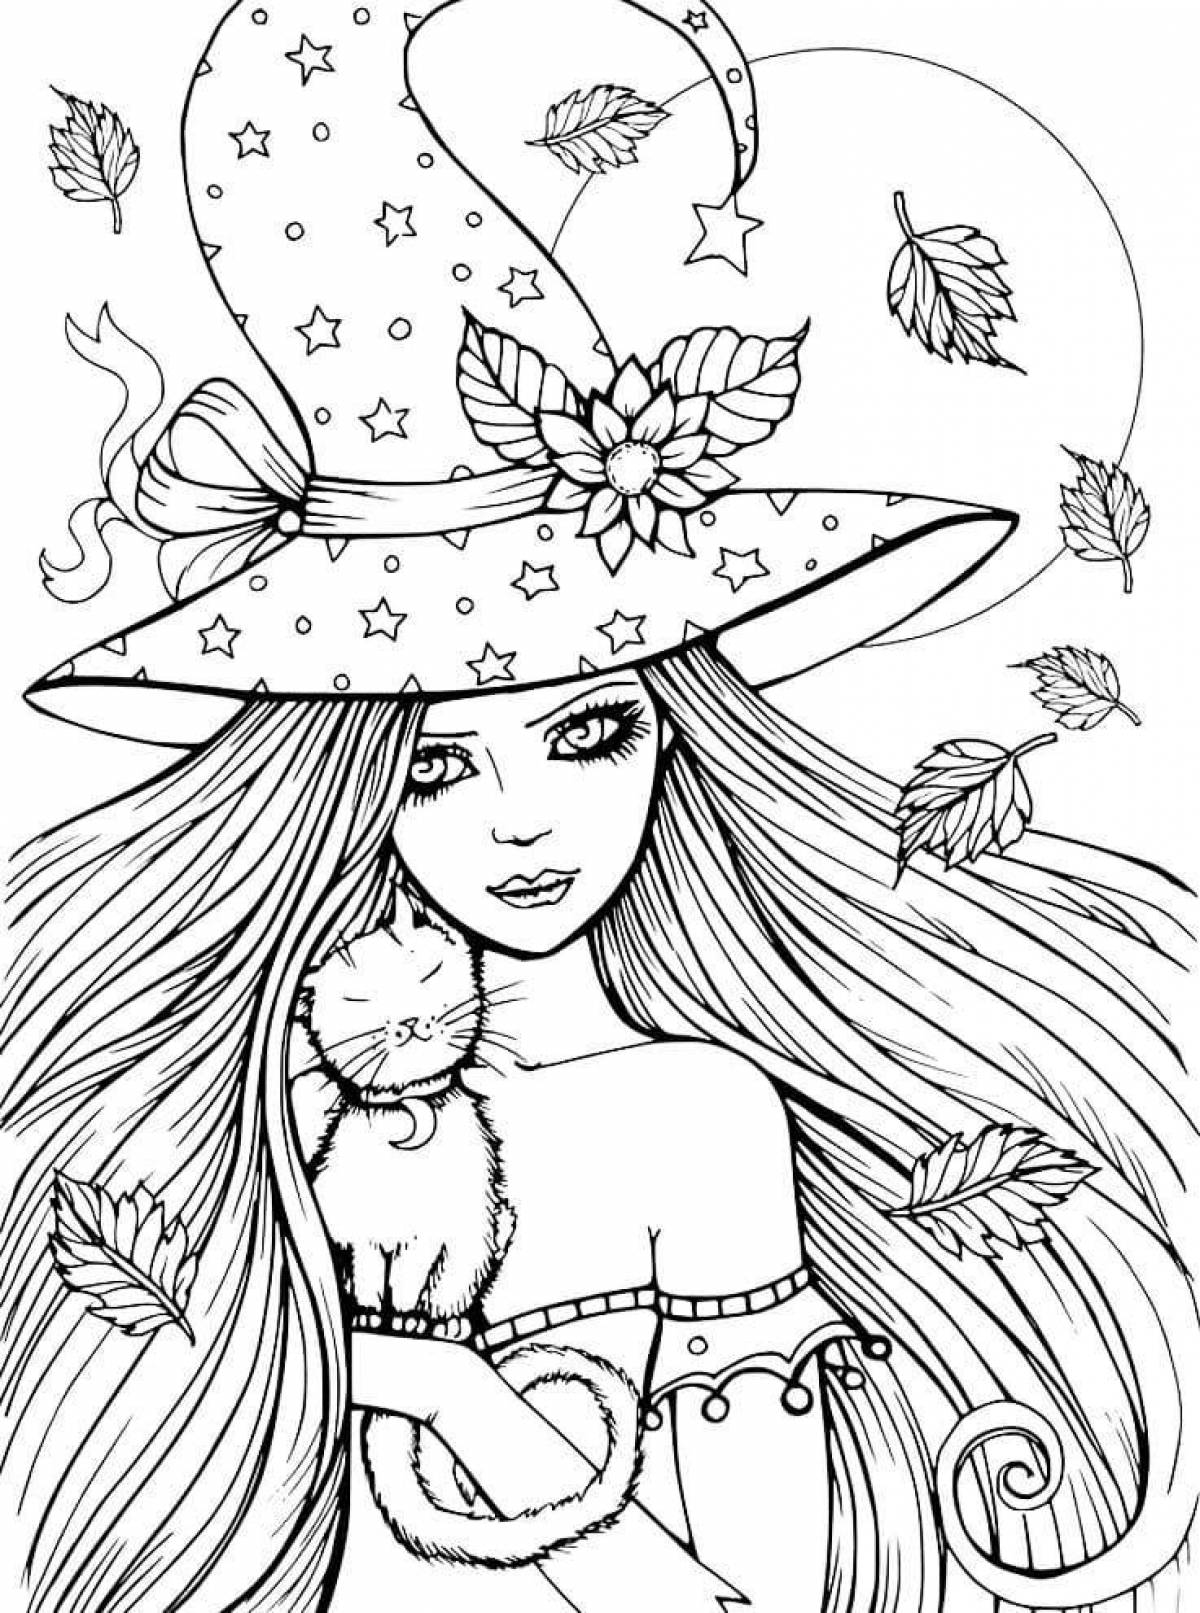 Colorful-adventure coloring book for girls 11-12 years old